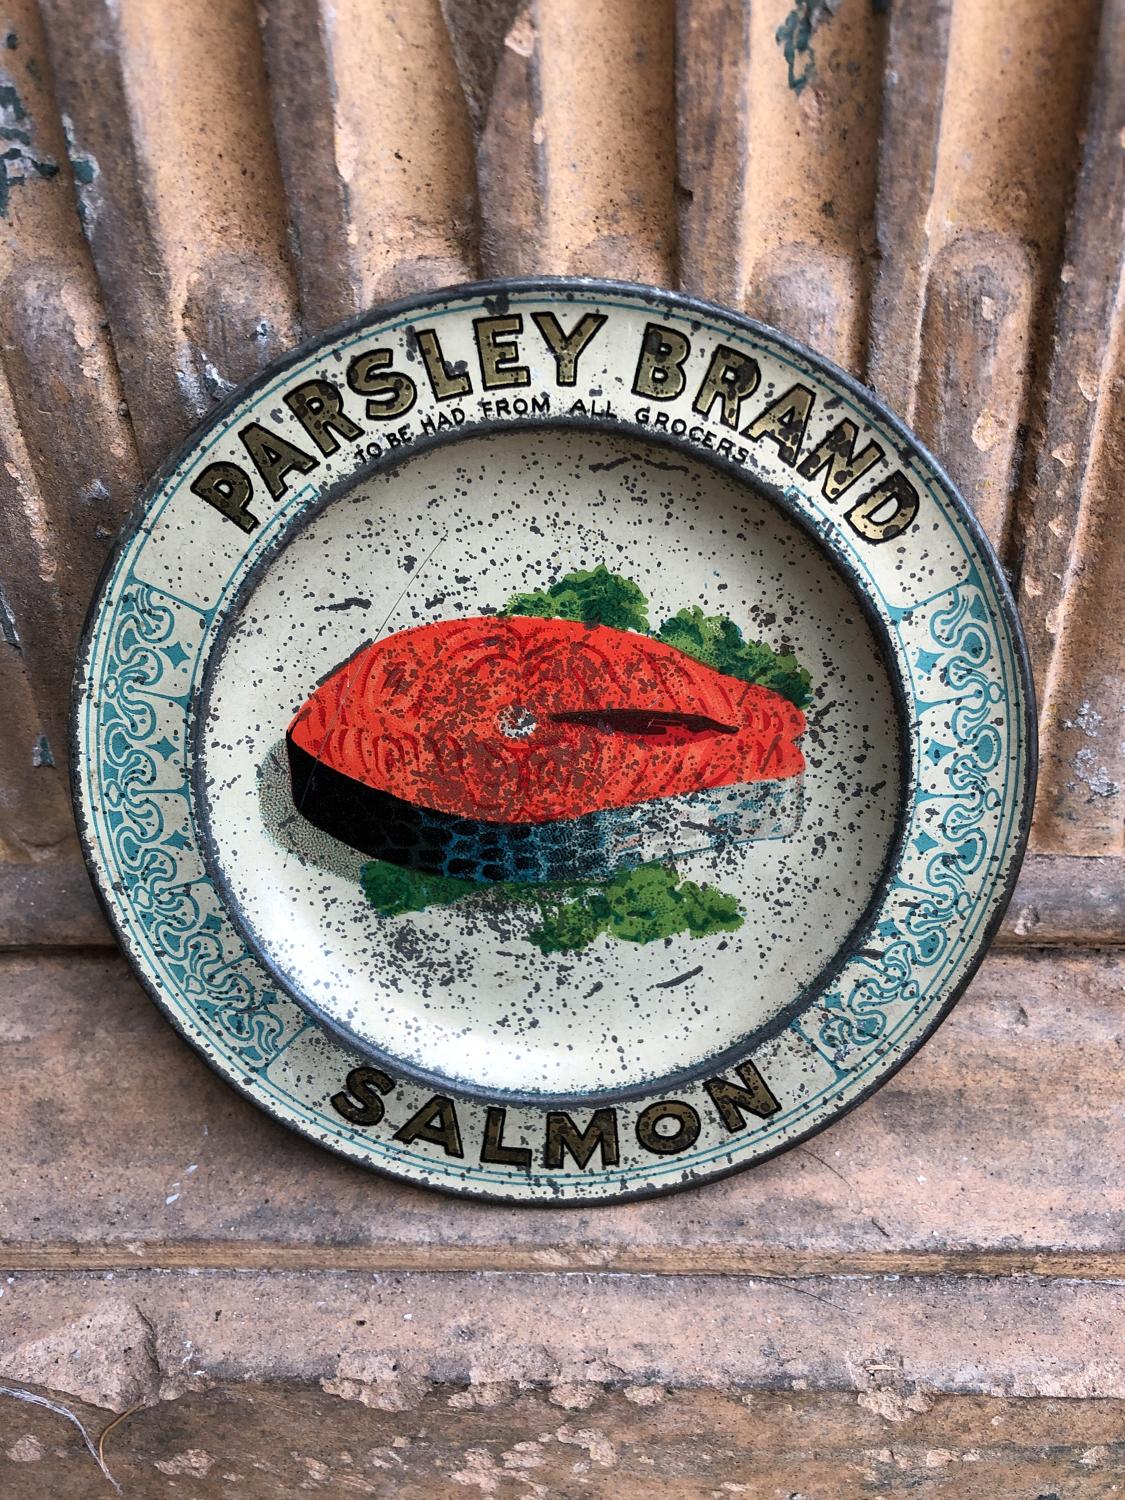 1920s Shops Advertising Change Tray - Parsley Brand Salmon